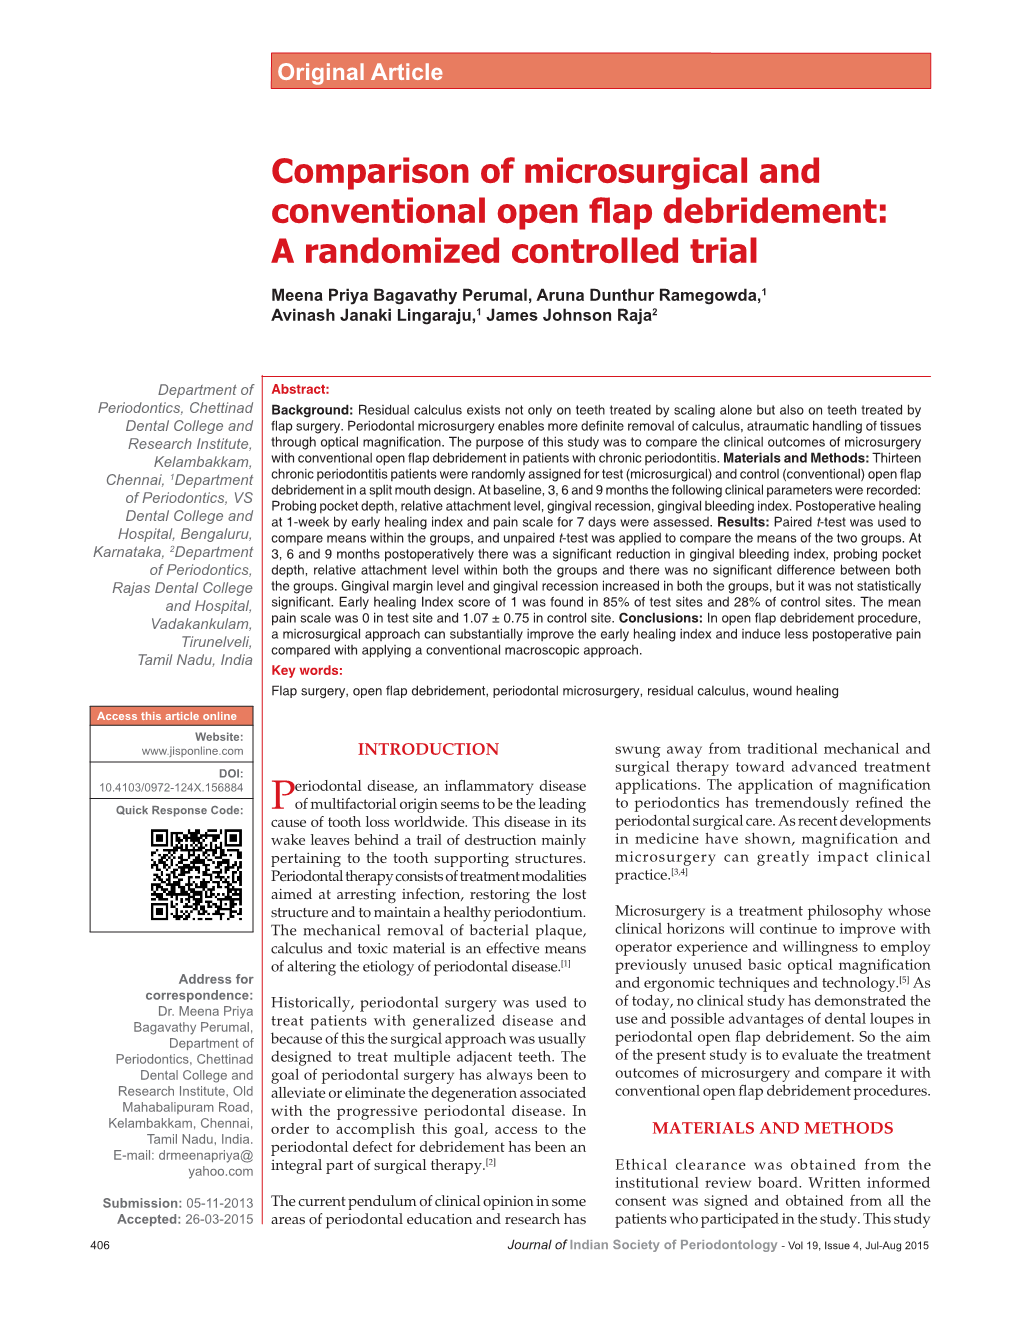 Comparison of Microsurgical and Conventional Open Flap Debridement